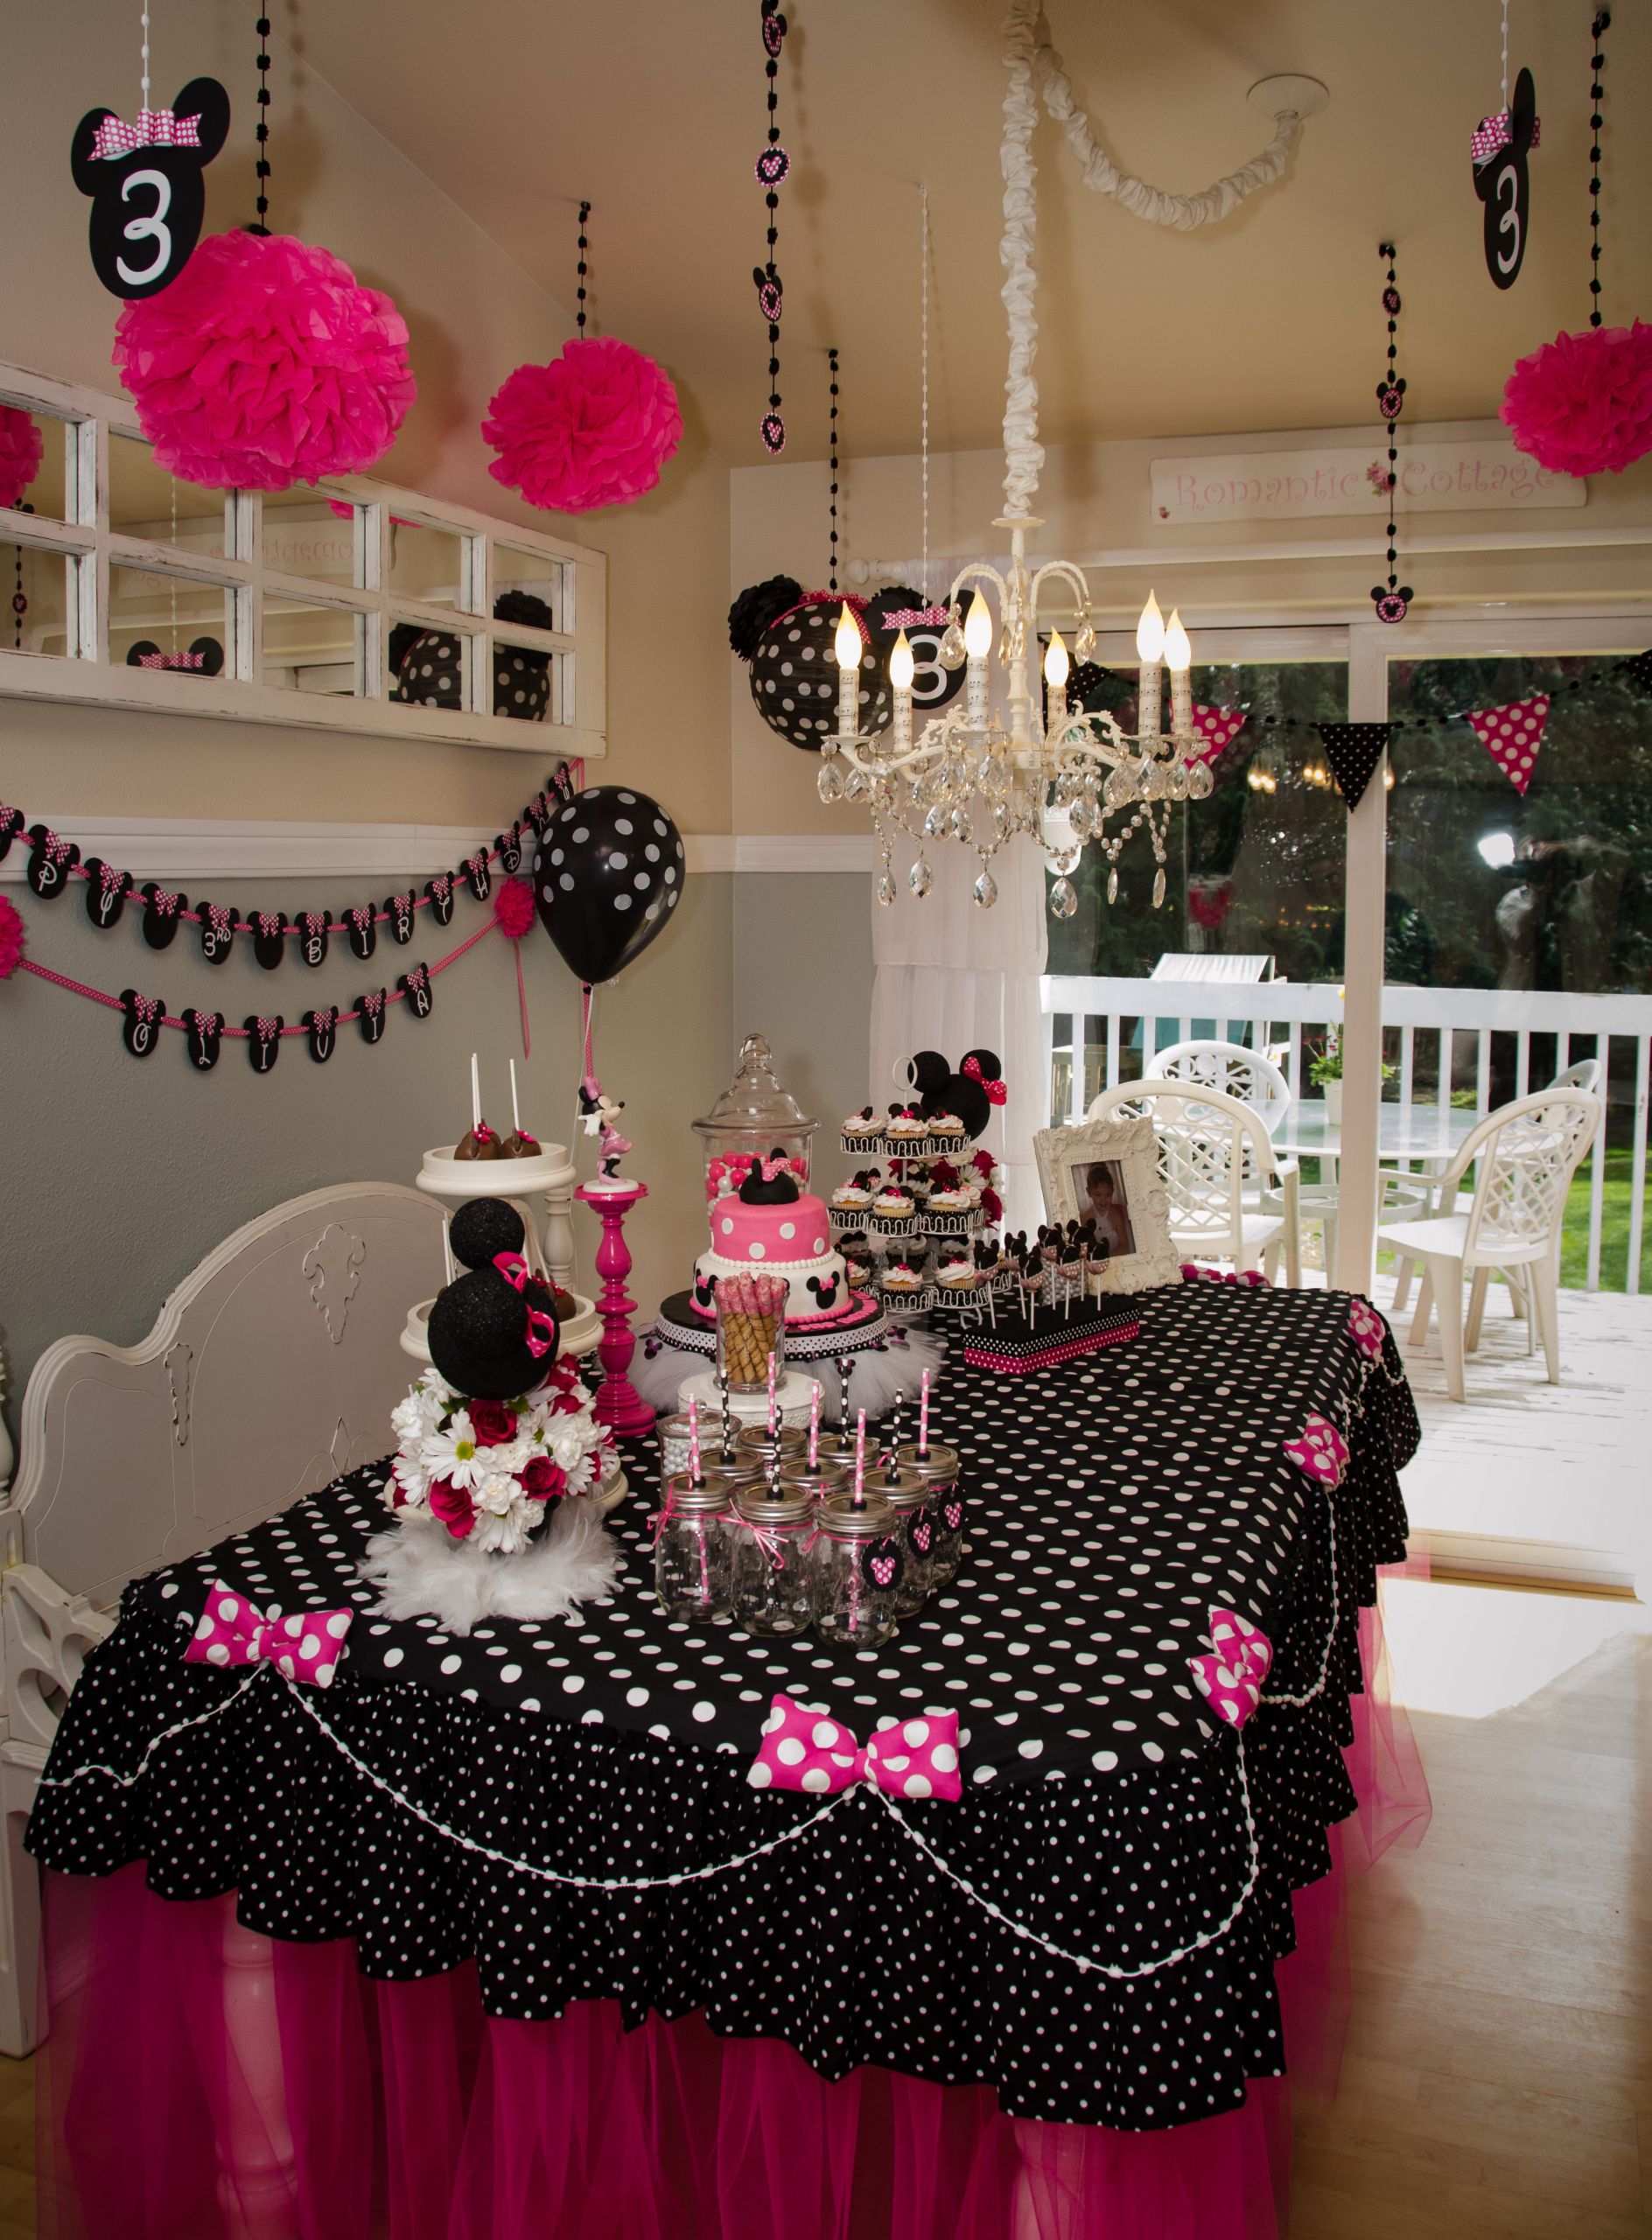 Ideas For A Minnie Mouse Birthday Party
 Minnie Mouse 3rd Birthday Party